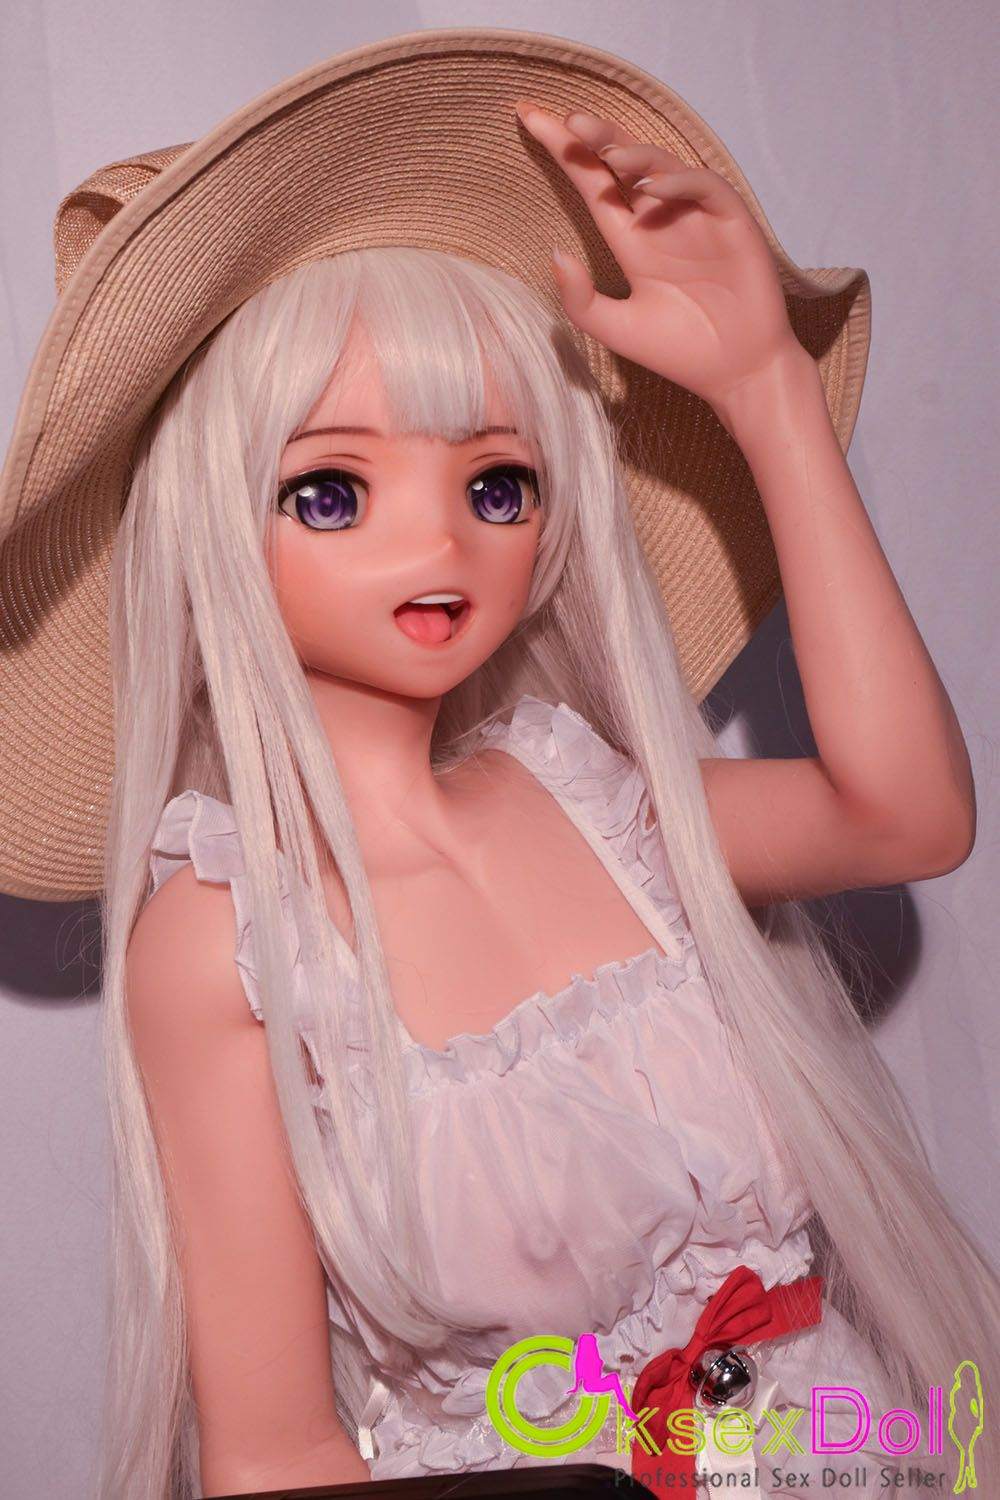 Small Breast Real Doll images